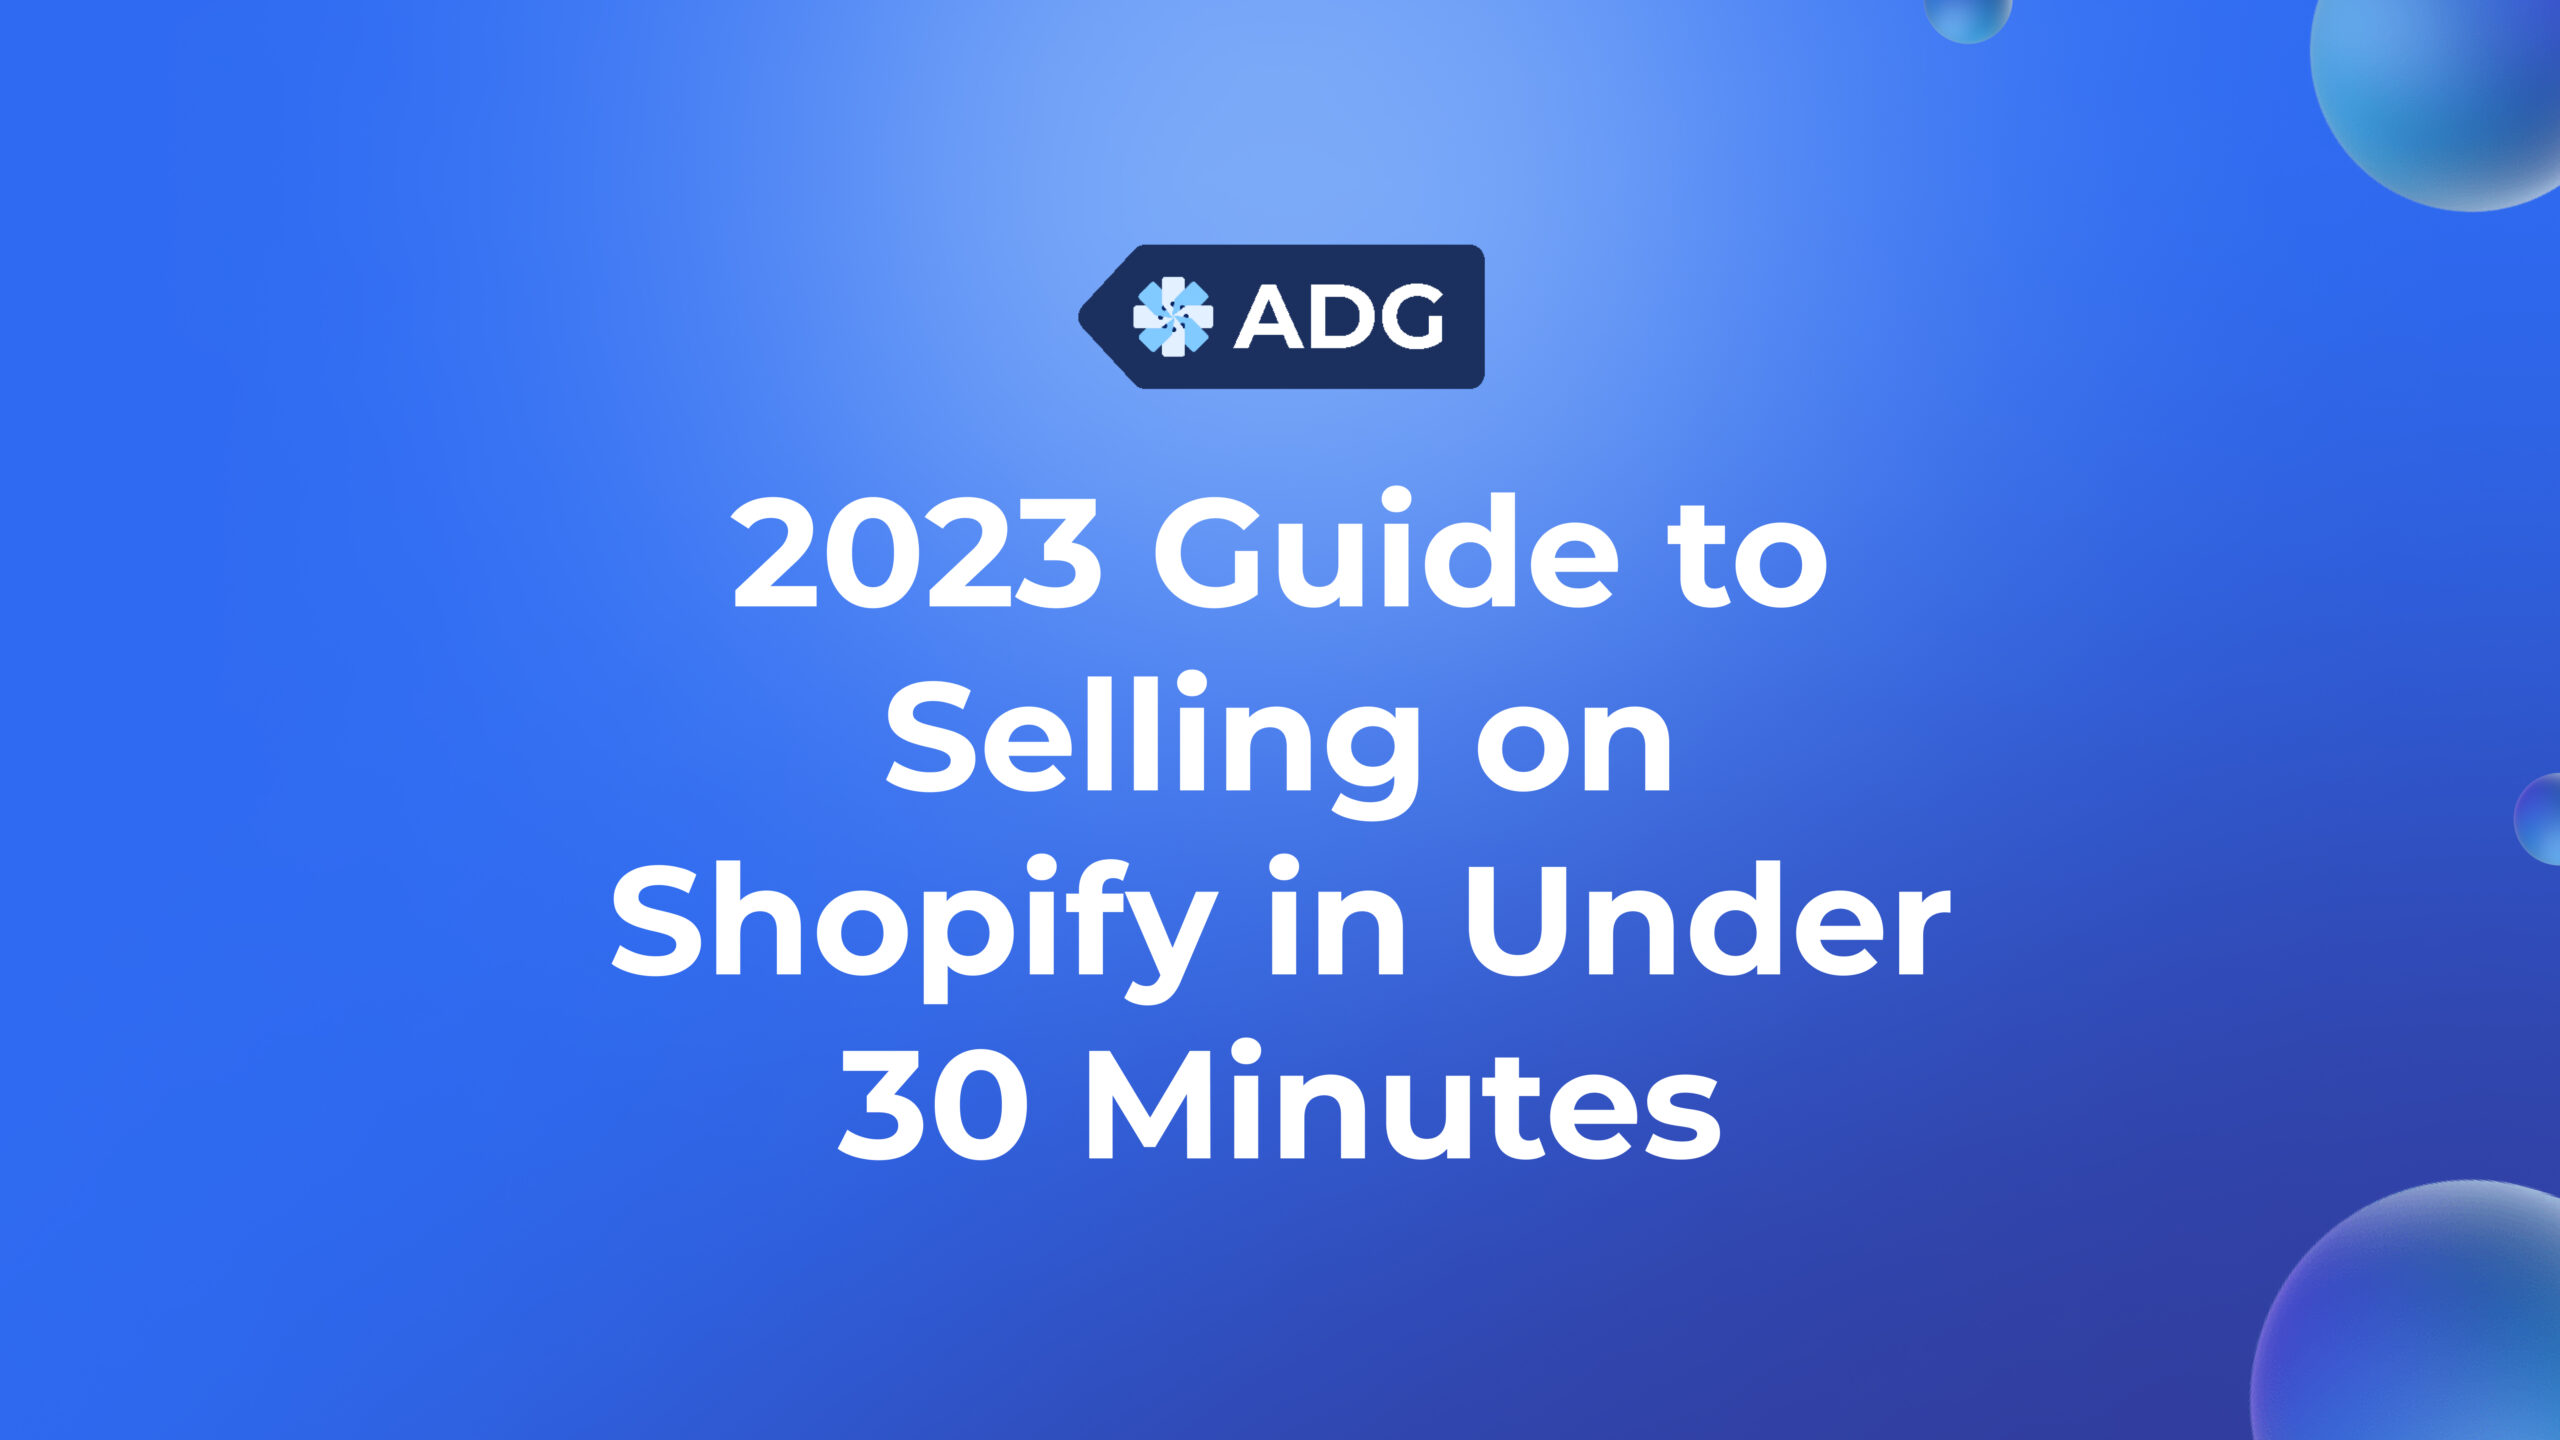 The Complete 2023 Guide to Help You Start Selling on Shopify in Under 30 Minutes